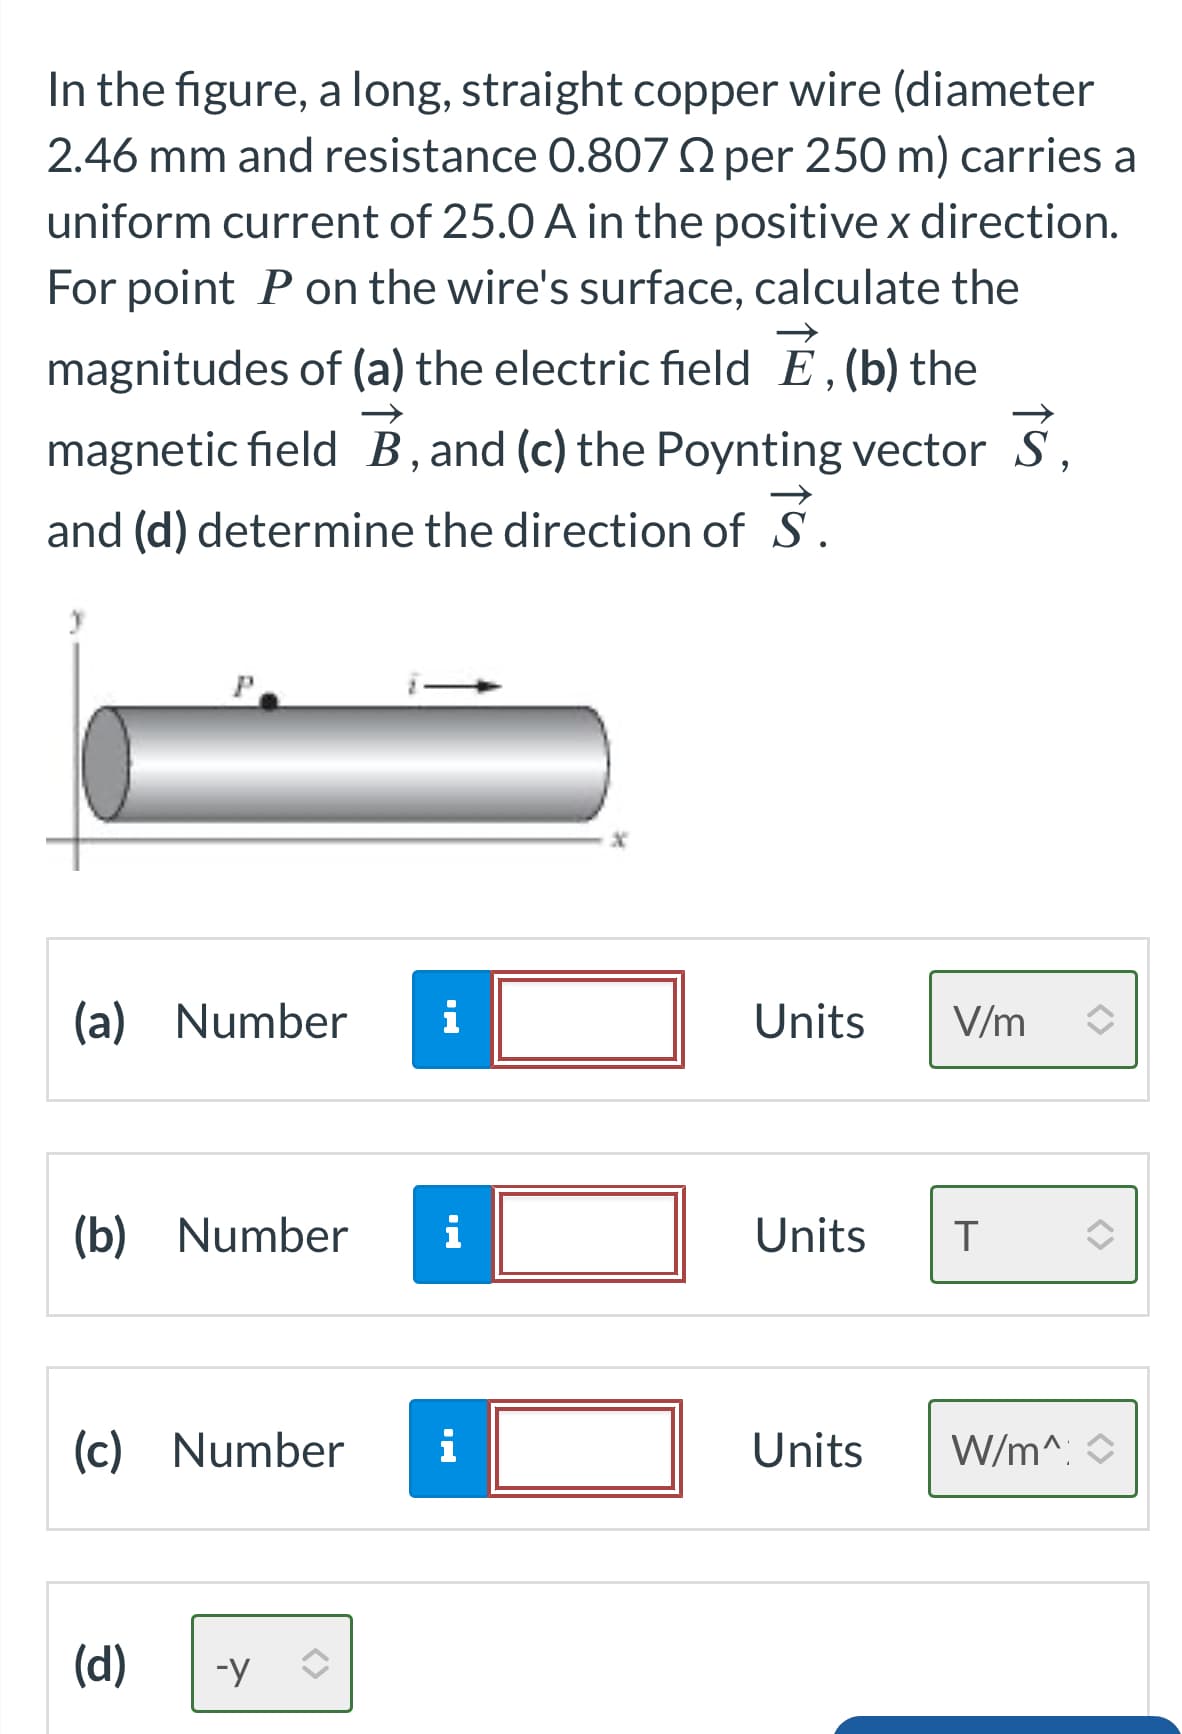 In the figure, a long, straight copper wire (diameter
2.46 mm and resistance 0.807 2 per 250 m) carries a
uniform current of 25.0 A in the positive x direction.
For point P on the wire's surface, calculate the
magnitudes of (a) the electric field E, (b) the
magnetic field B, and (c) the Poynting vector 3,
and (d) determine the direction of S.
y
P
(a) Number i
(b) Number i
(c) Number
(d)
-Y
i
Units V/m
Units T
Units W/m^